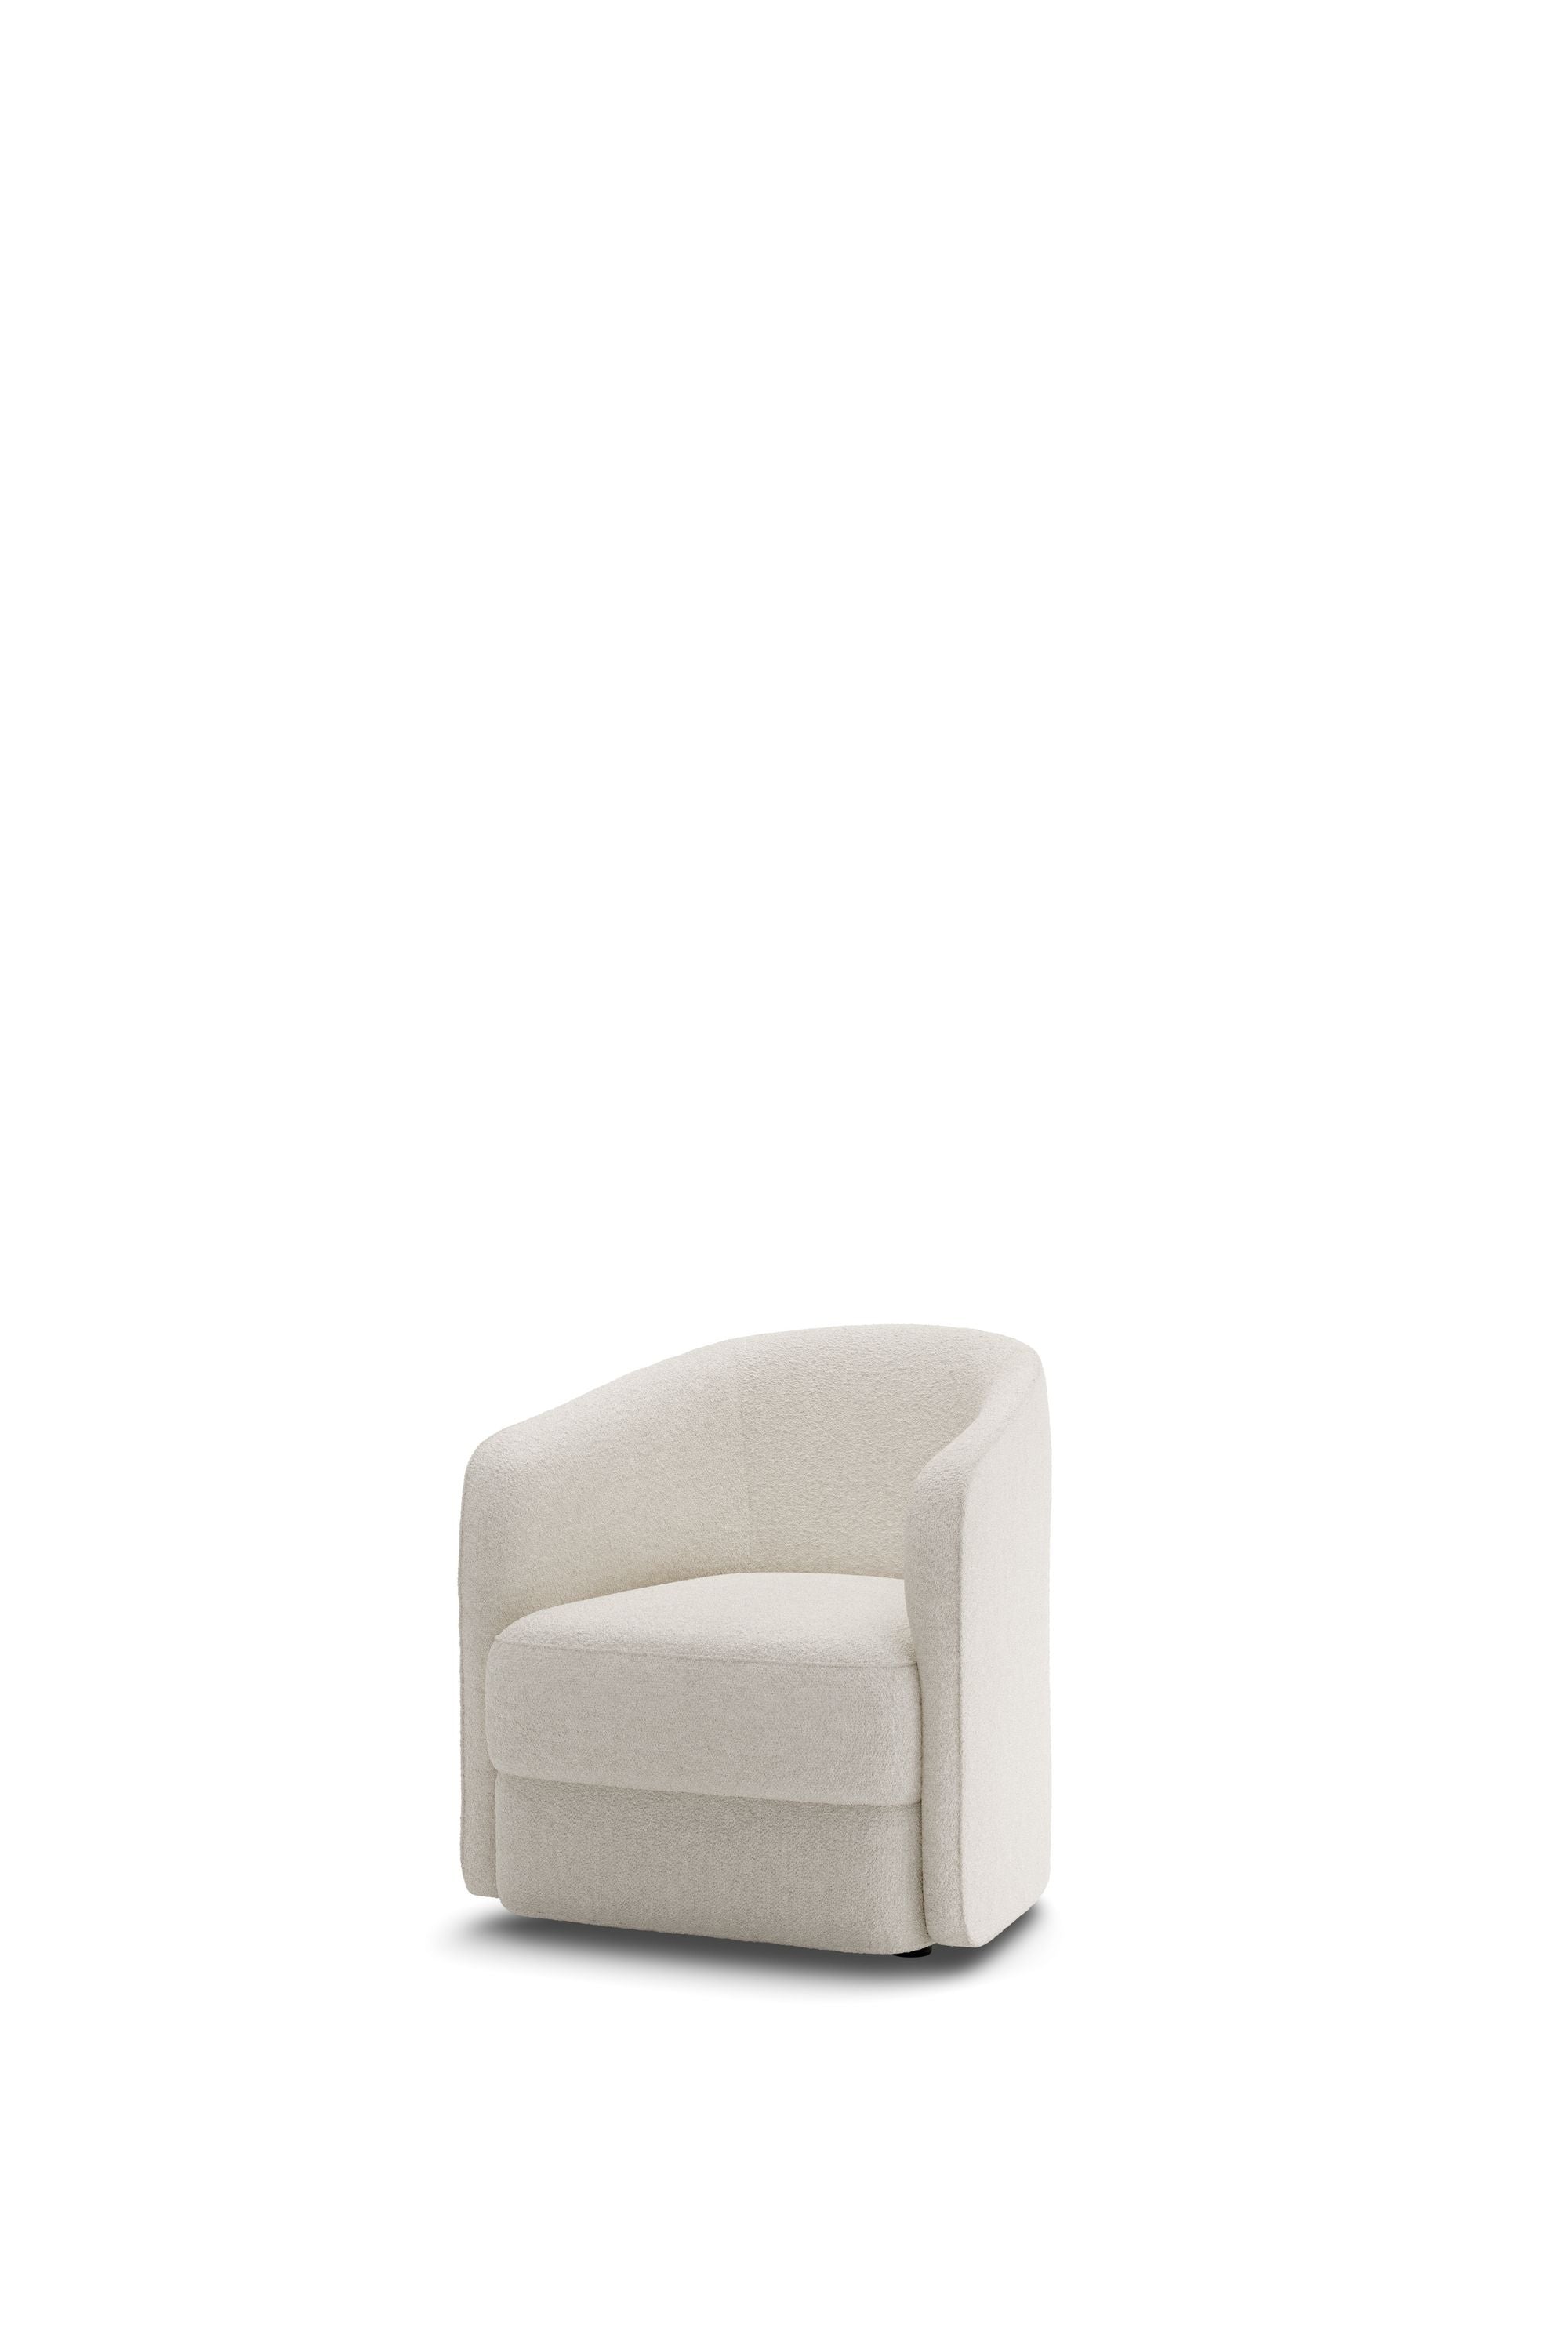 New Works Covent Lounge Chair Schmal, Lana